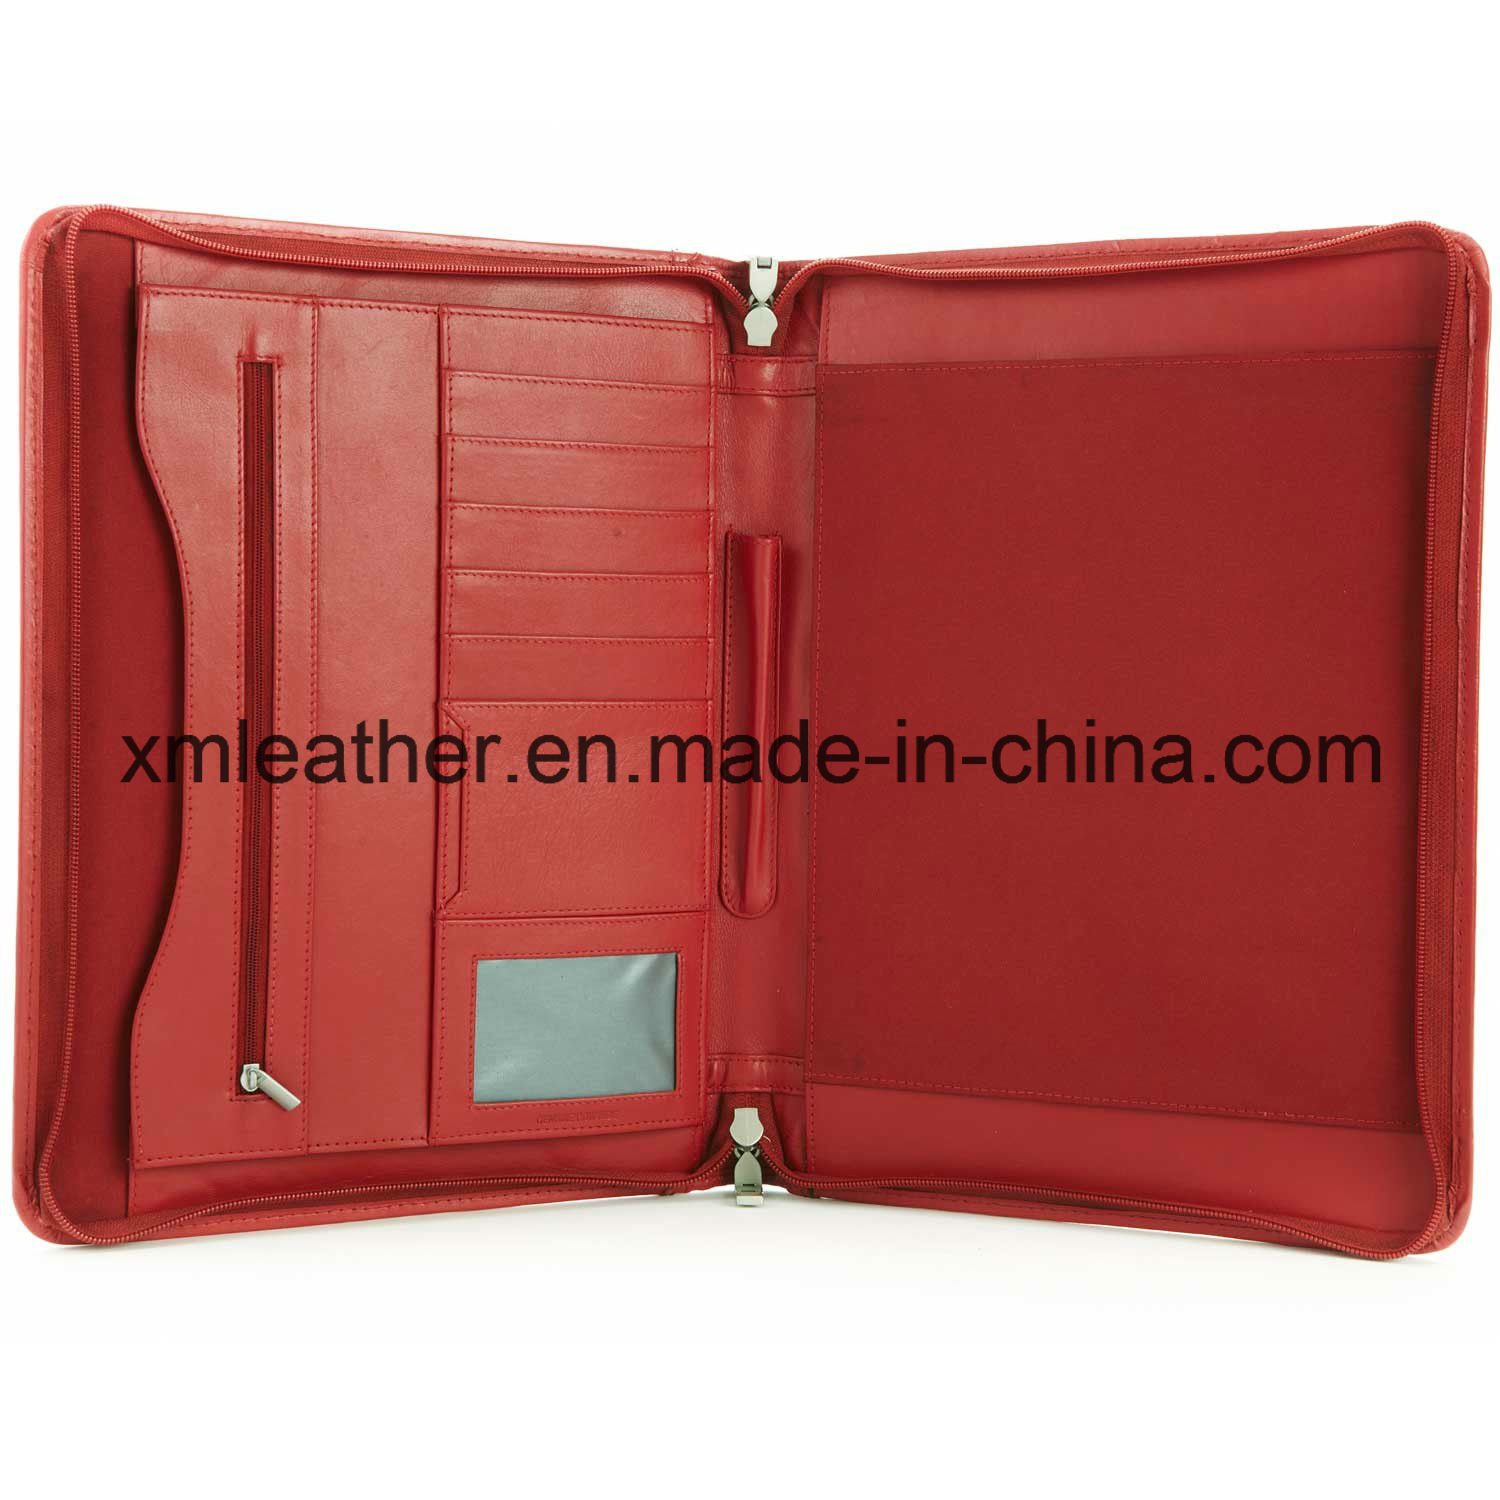 /proimages/2f0j00AJutgvMmwrbw/plan-ahead-organized-professional-leather-padfolio-with-zip-closed.jpg